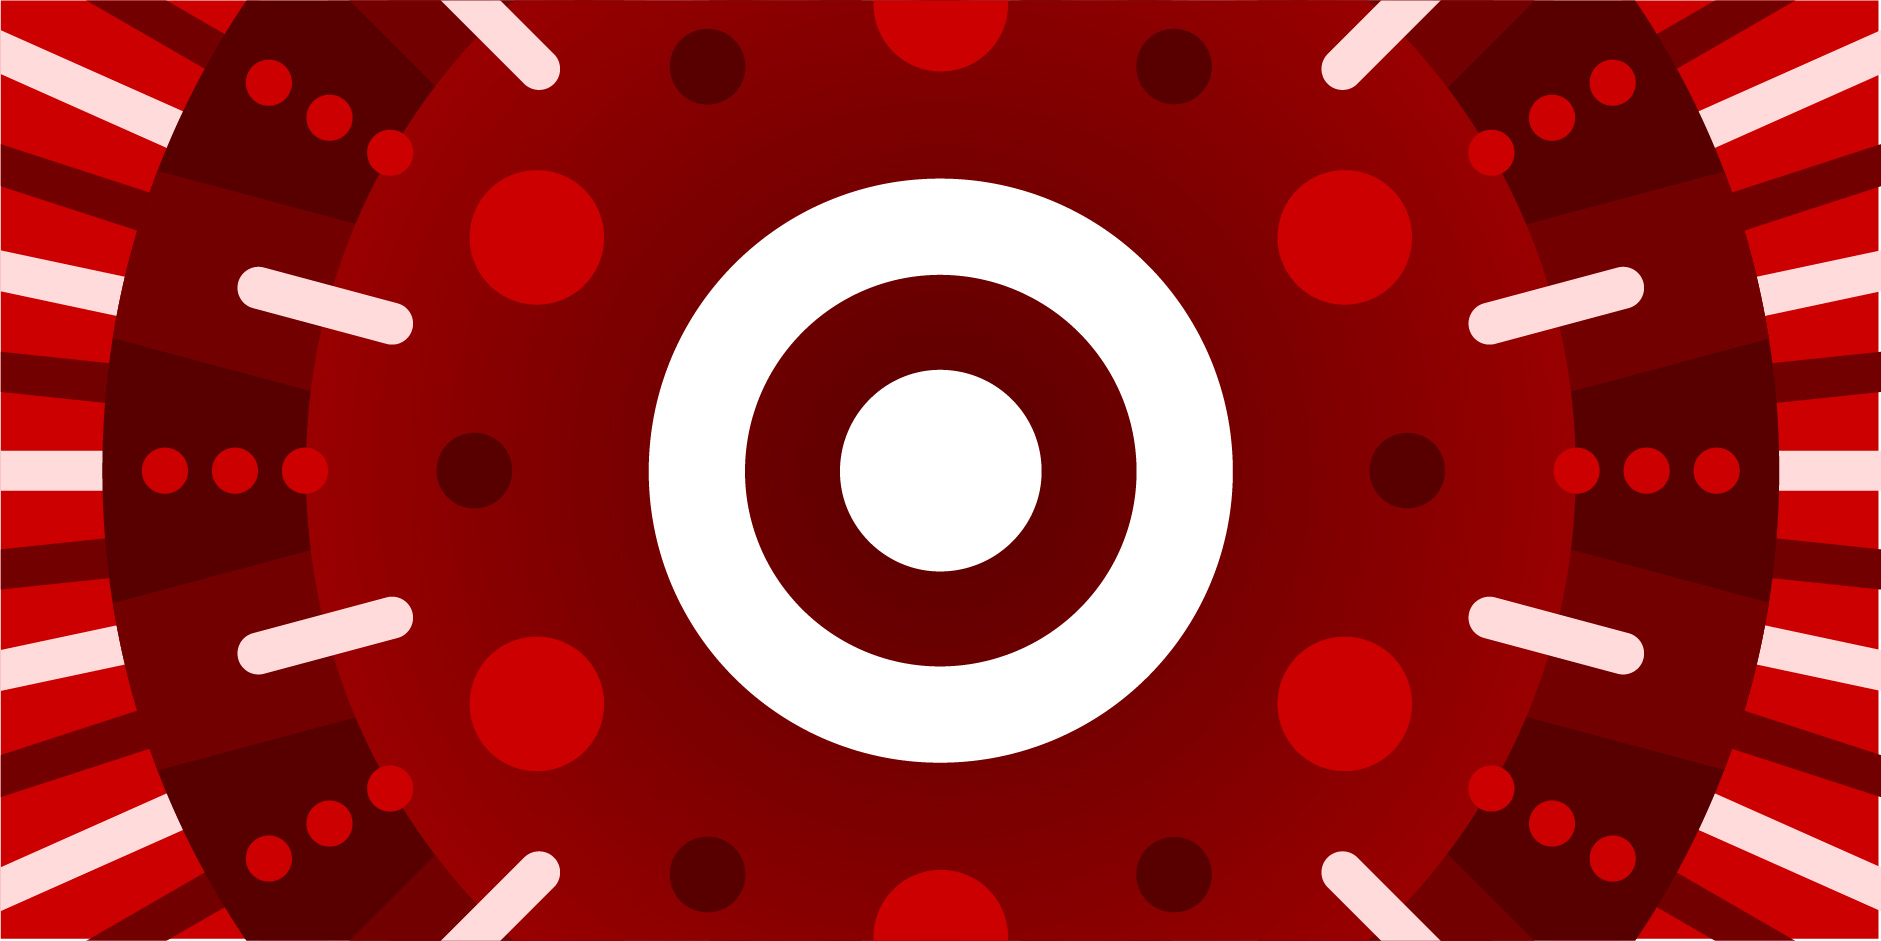 A graphic with the Target logo in the middle, surrounded by lines and circles going outward.